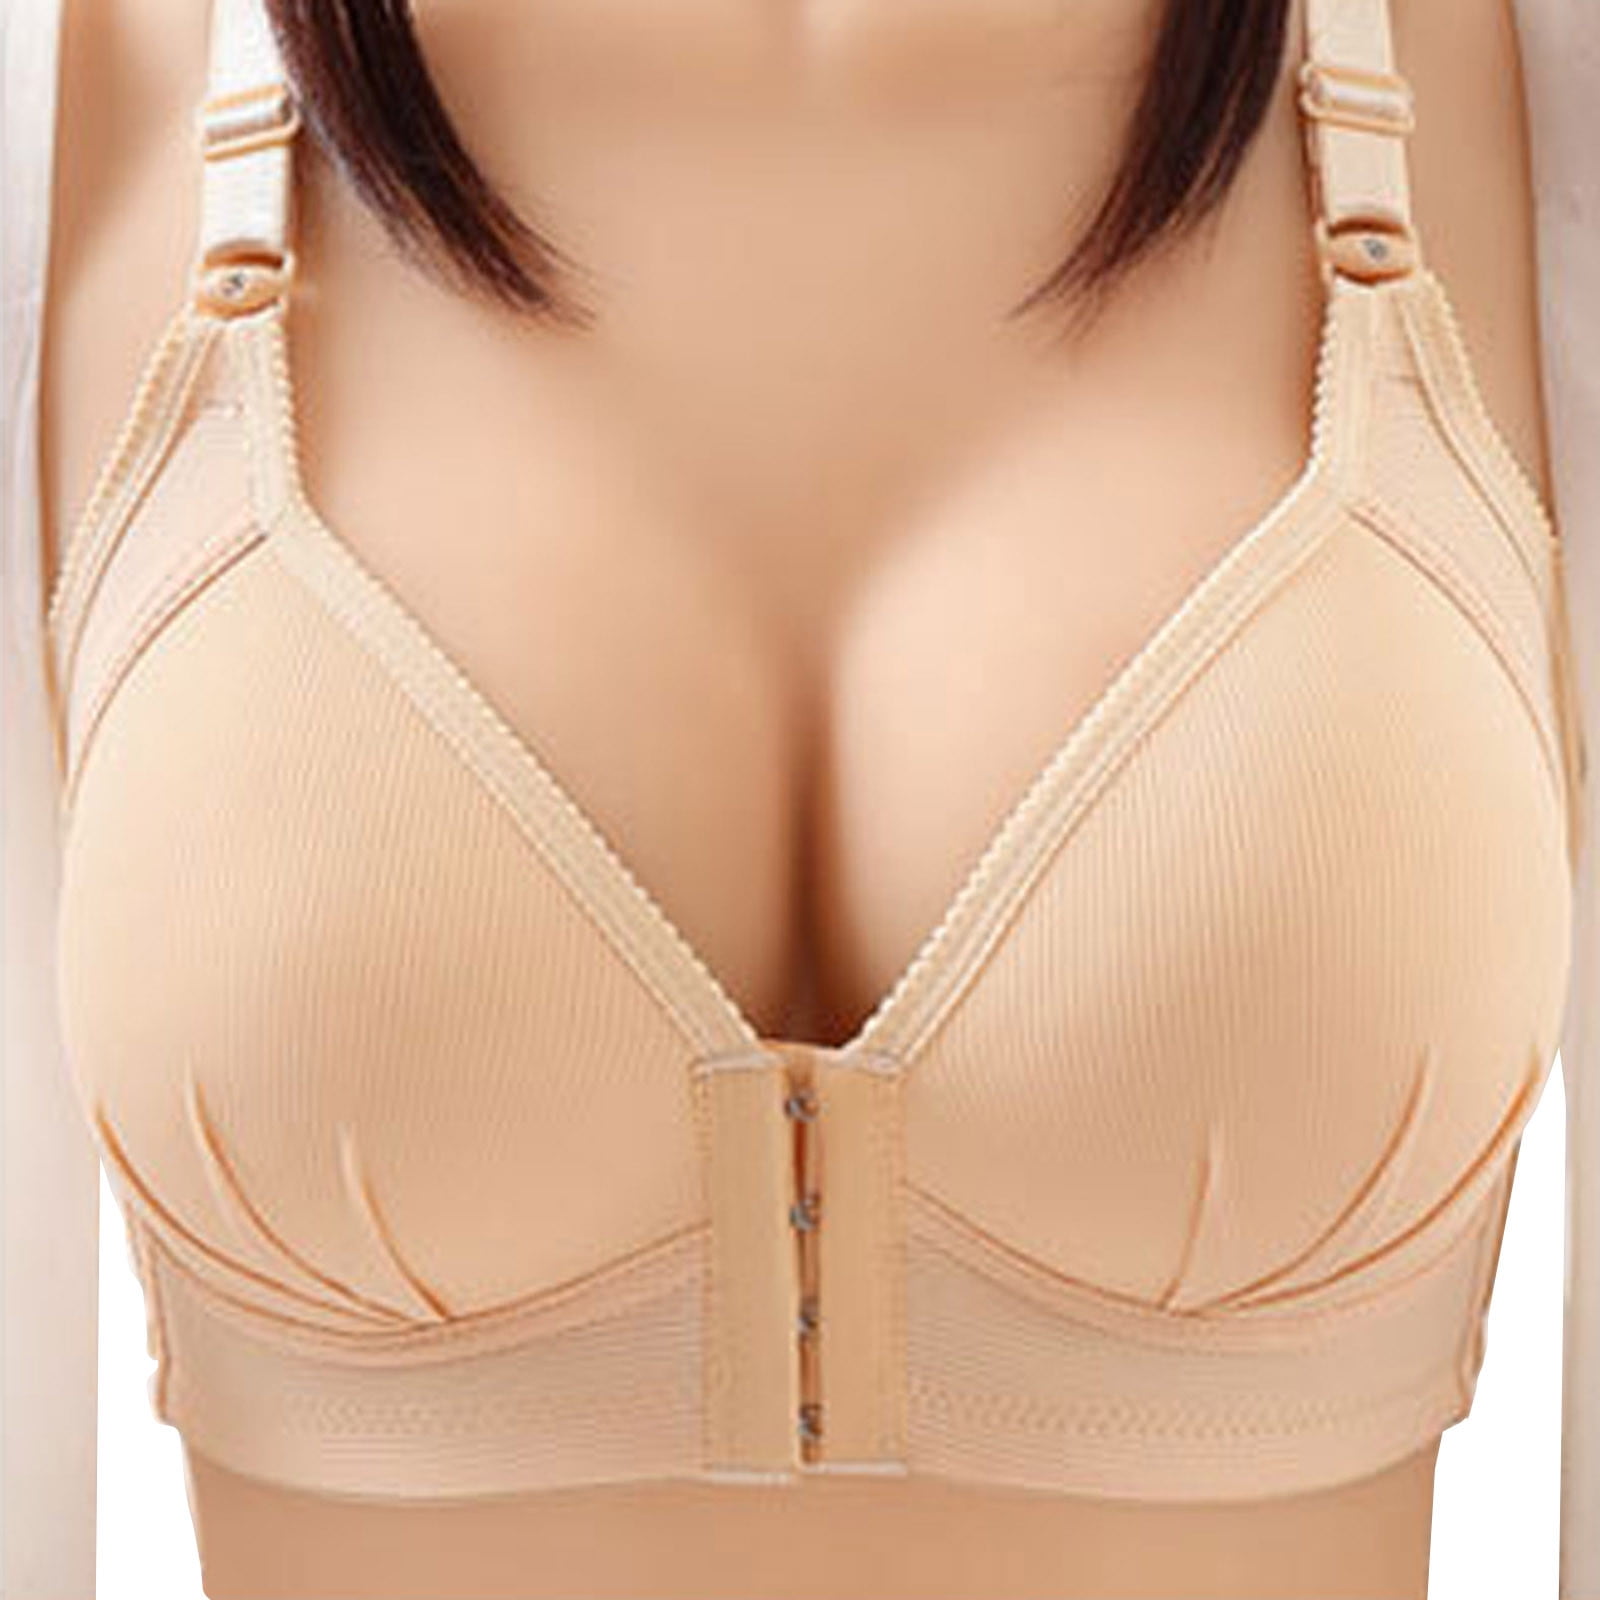 SELONE Bras for Women Front Closure Full Coverage Bras Adjustable